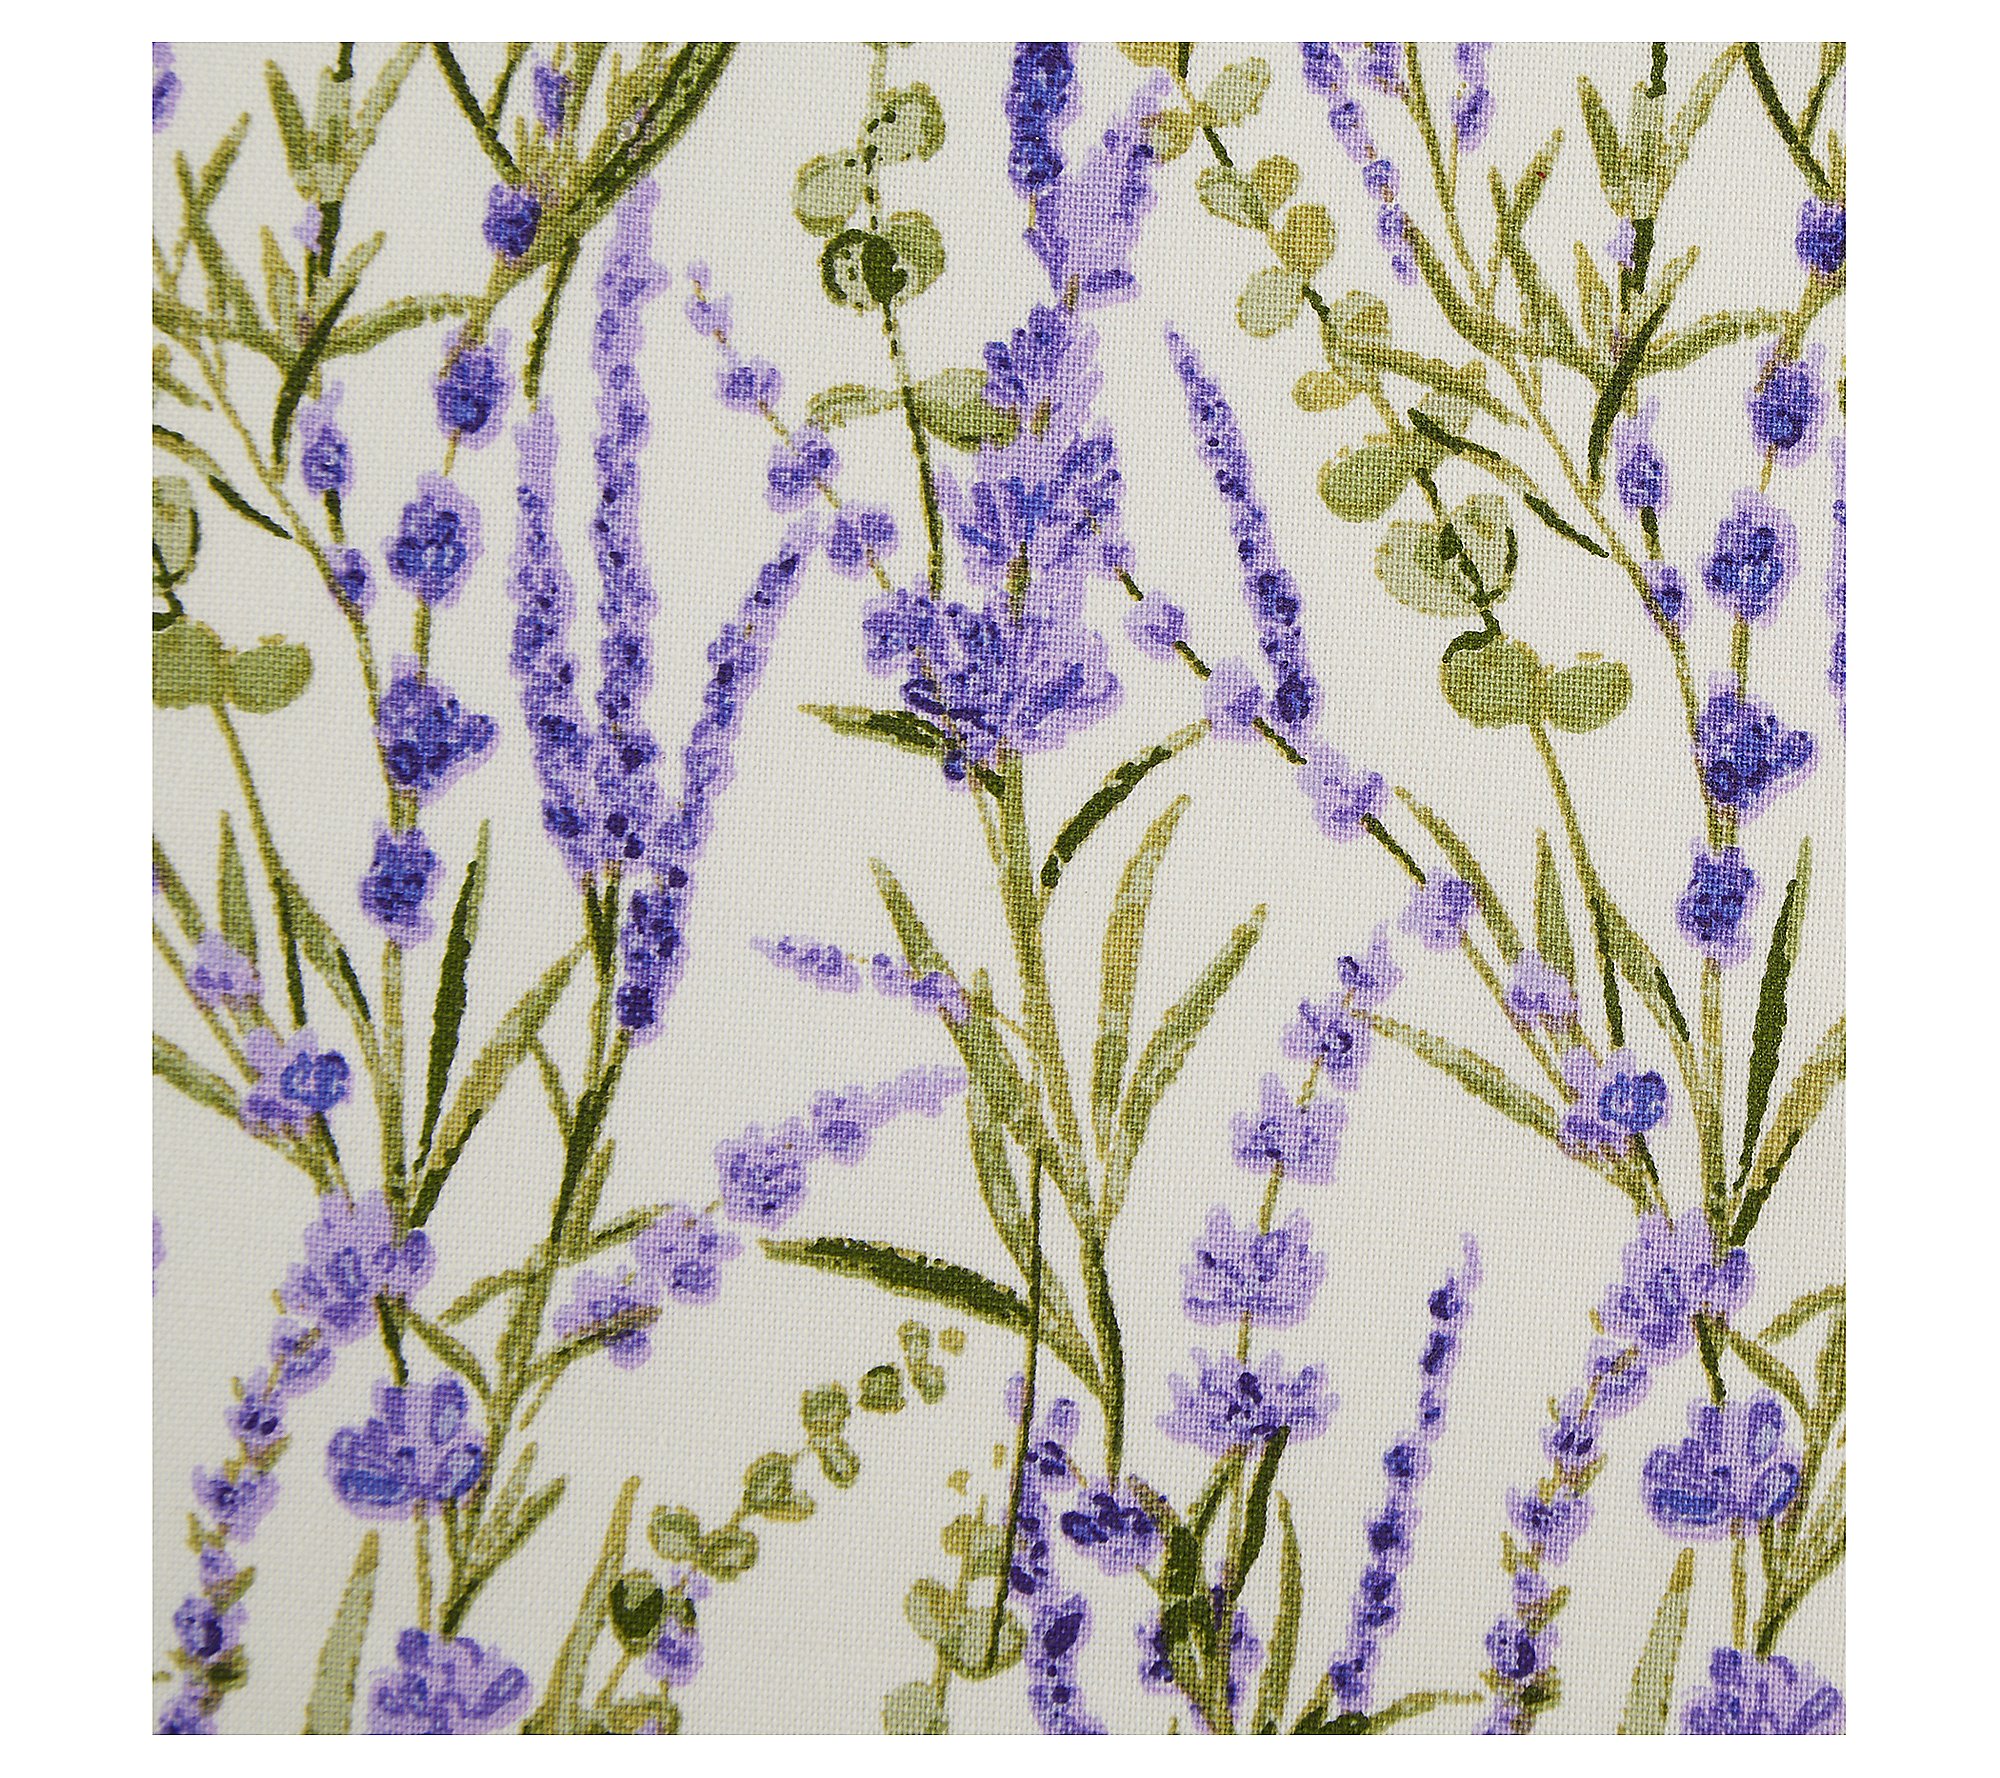 Design Imports 60X84 Lavender Fields Printed Tablecloth